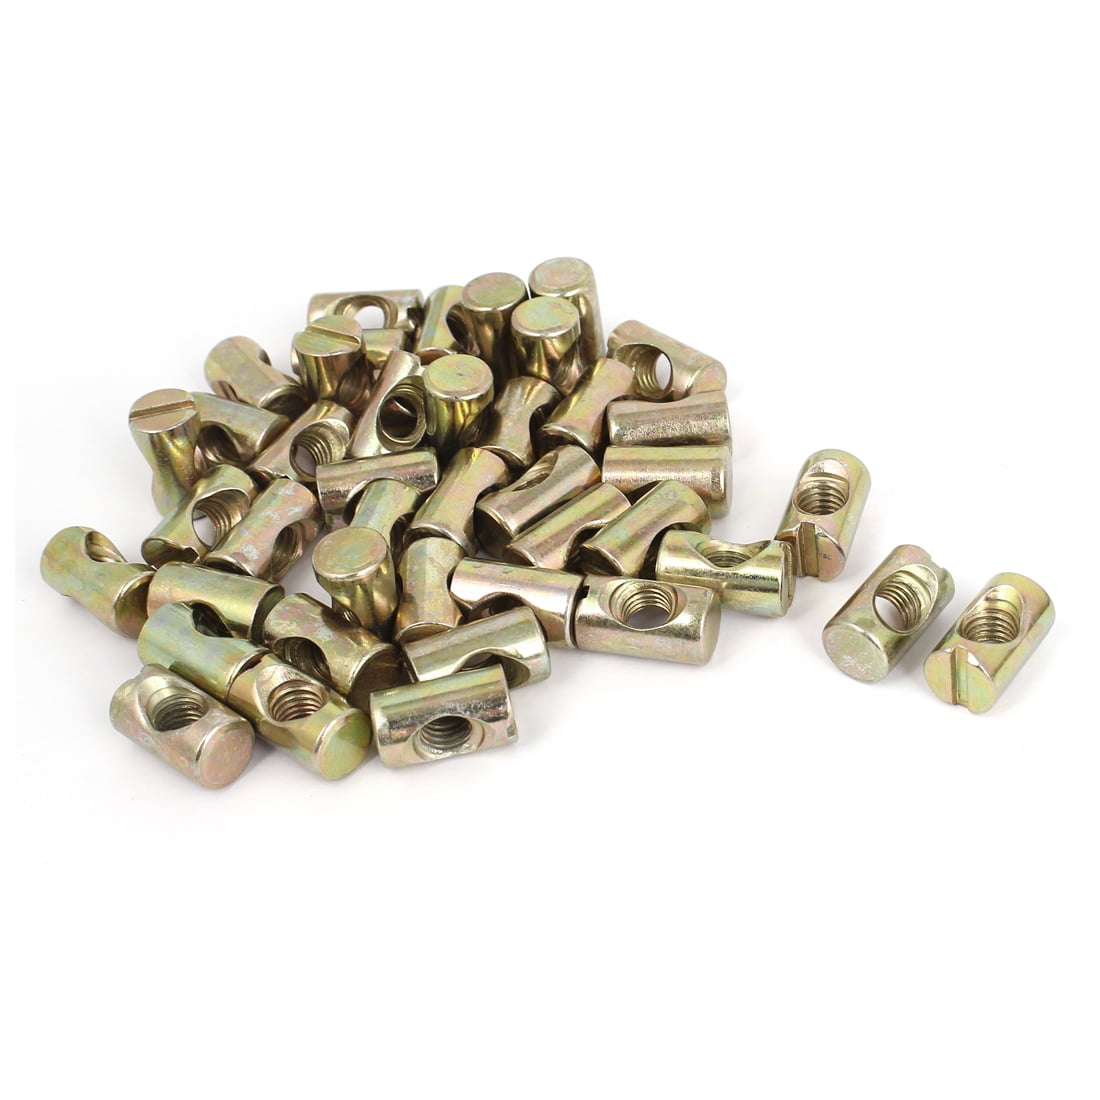 M9R4 10pcs M6 Barrel Bolts Cross Dowel Slotted Furniture Nut for Beds Crib Chair